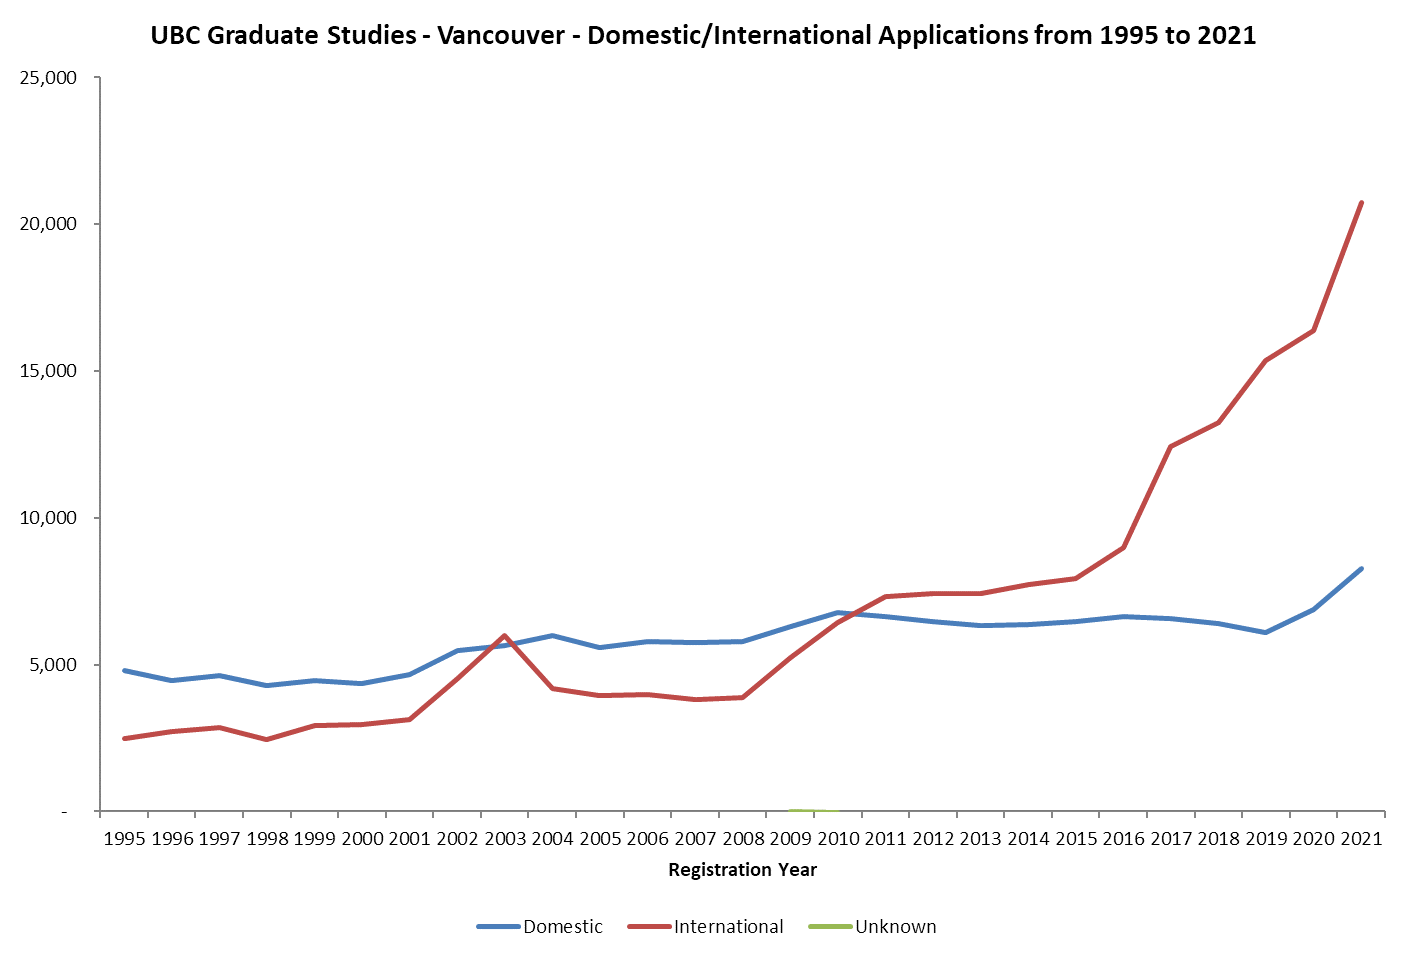 UBC Graduate Studies - Masters and Doctoral International Application Numbers from 1995 to 2021